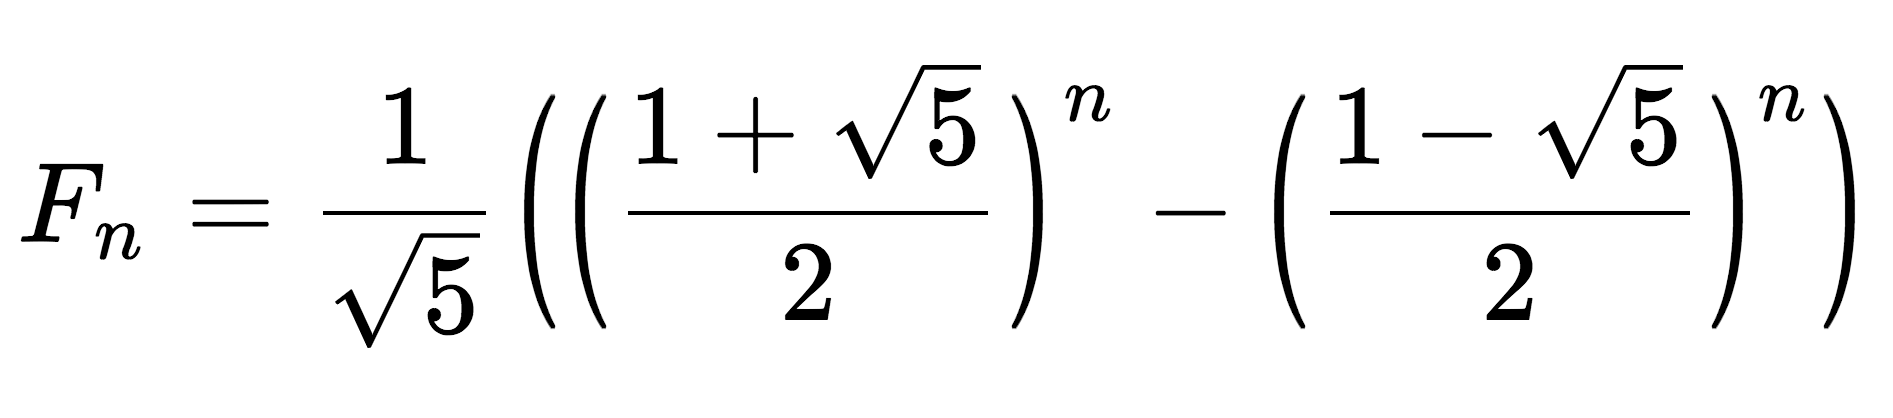 mathematical representation of Binet's formula, which is used to solve the nth term in the Fibonacci sequence